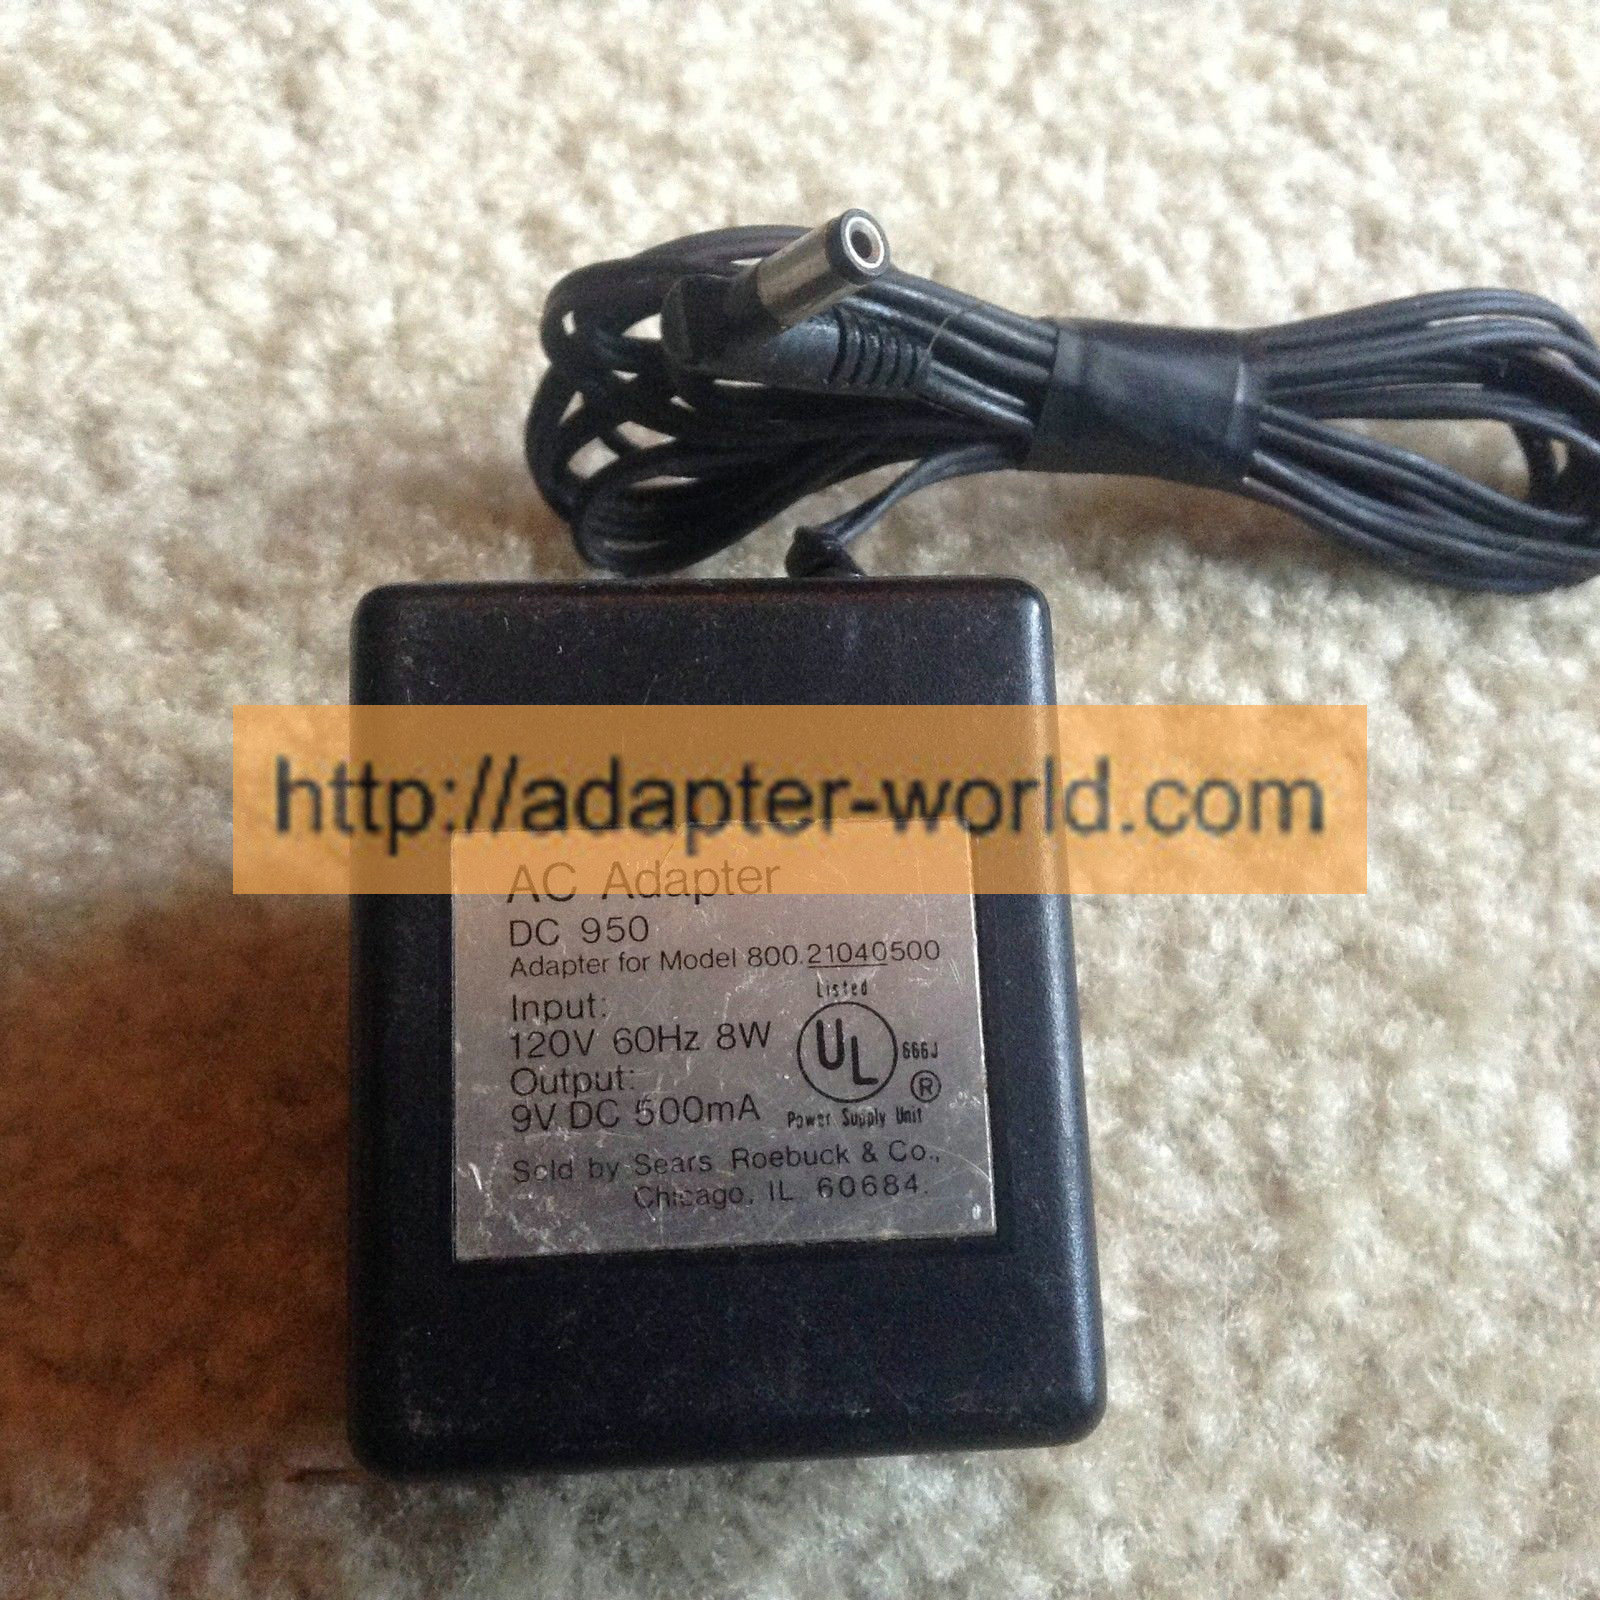 *100% Brand NEW* SEARS 950/21040500 AC/DC WALL WART ADAPTER CORD 9V 500mA POWER SUPPLY Free shipping!